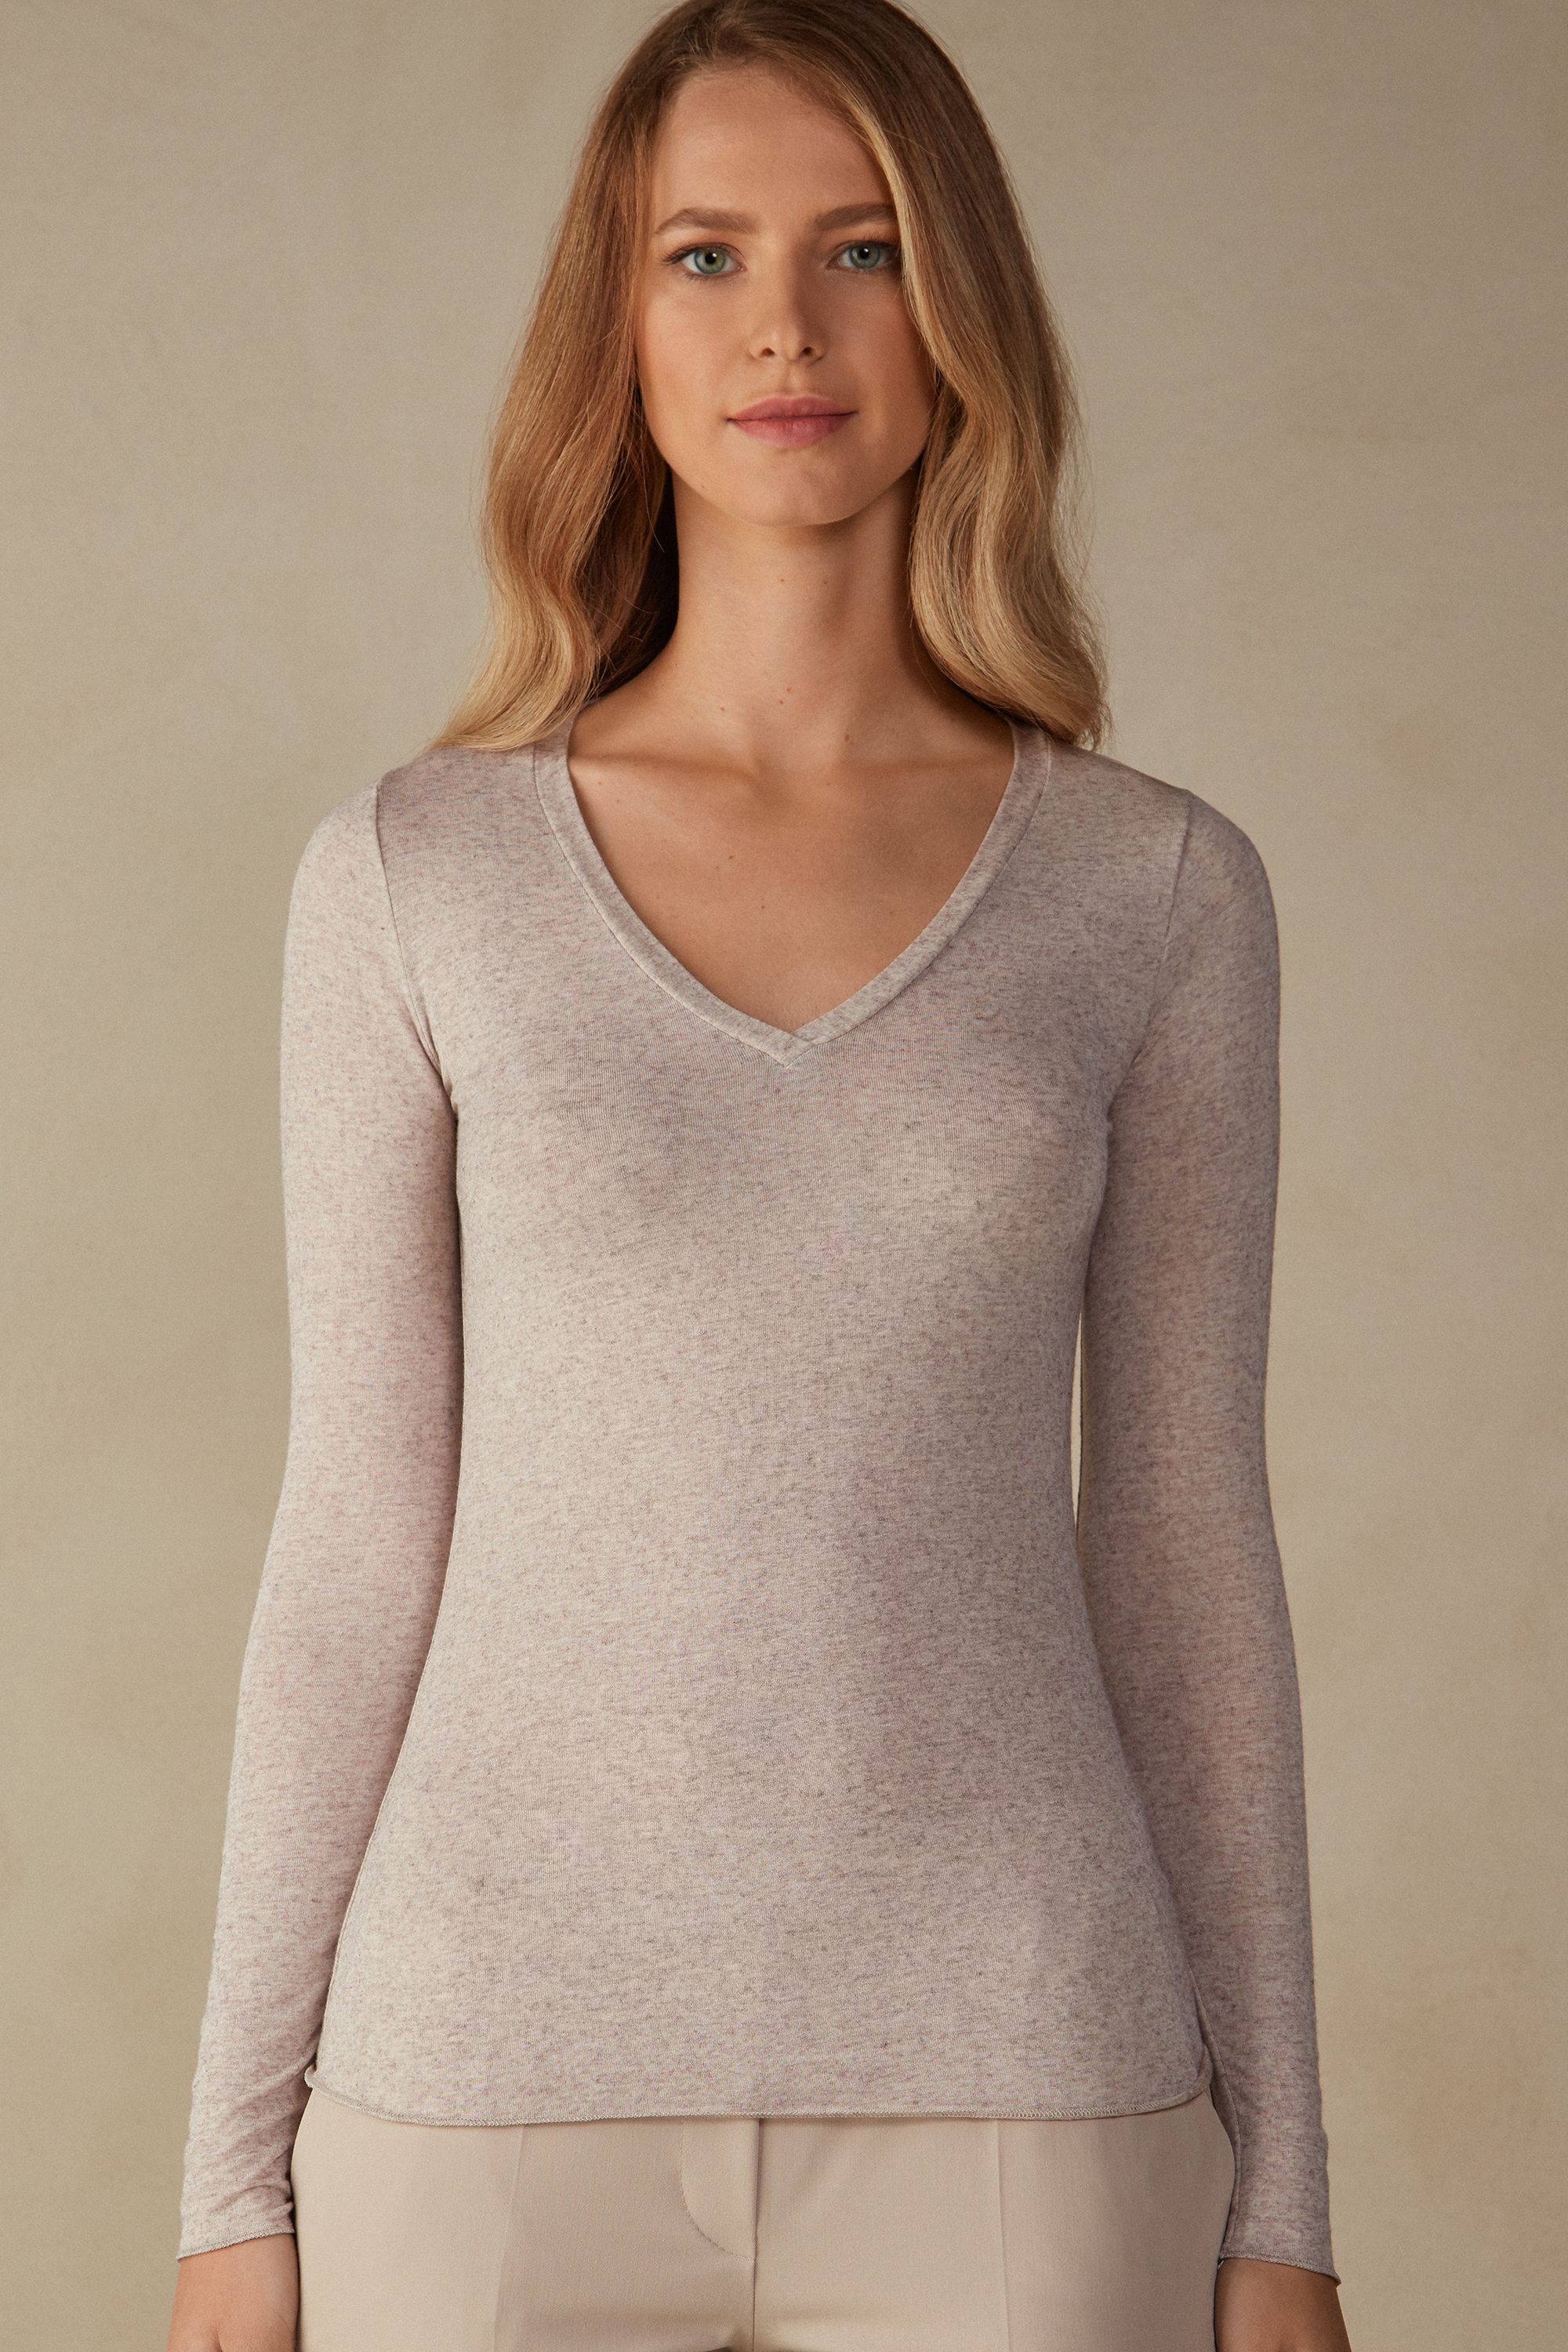 V-neck top in Modal Ultralight with Cashmere | Intimissimi (US)